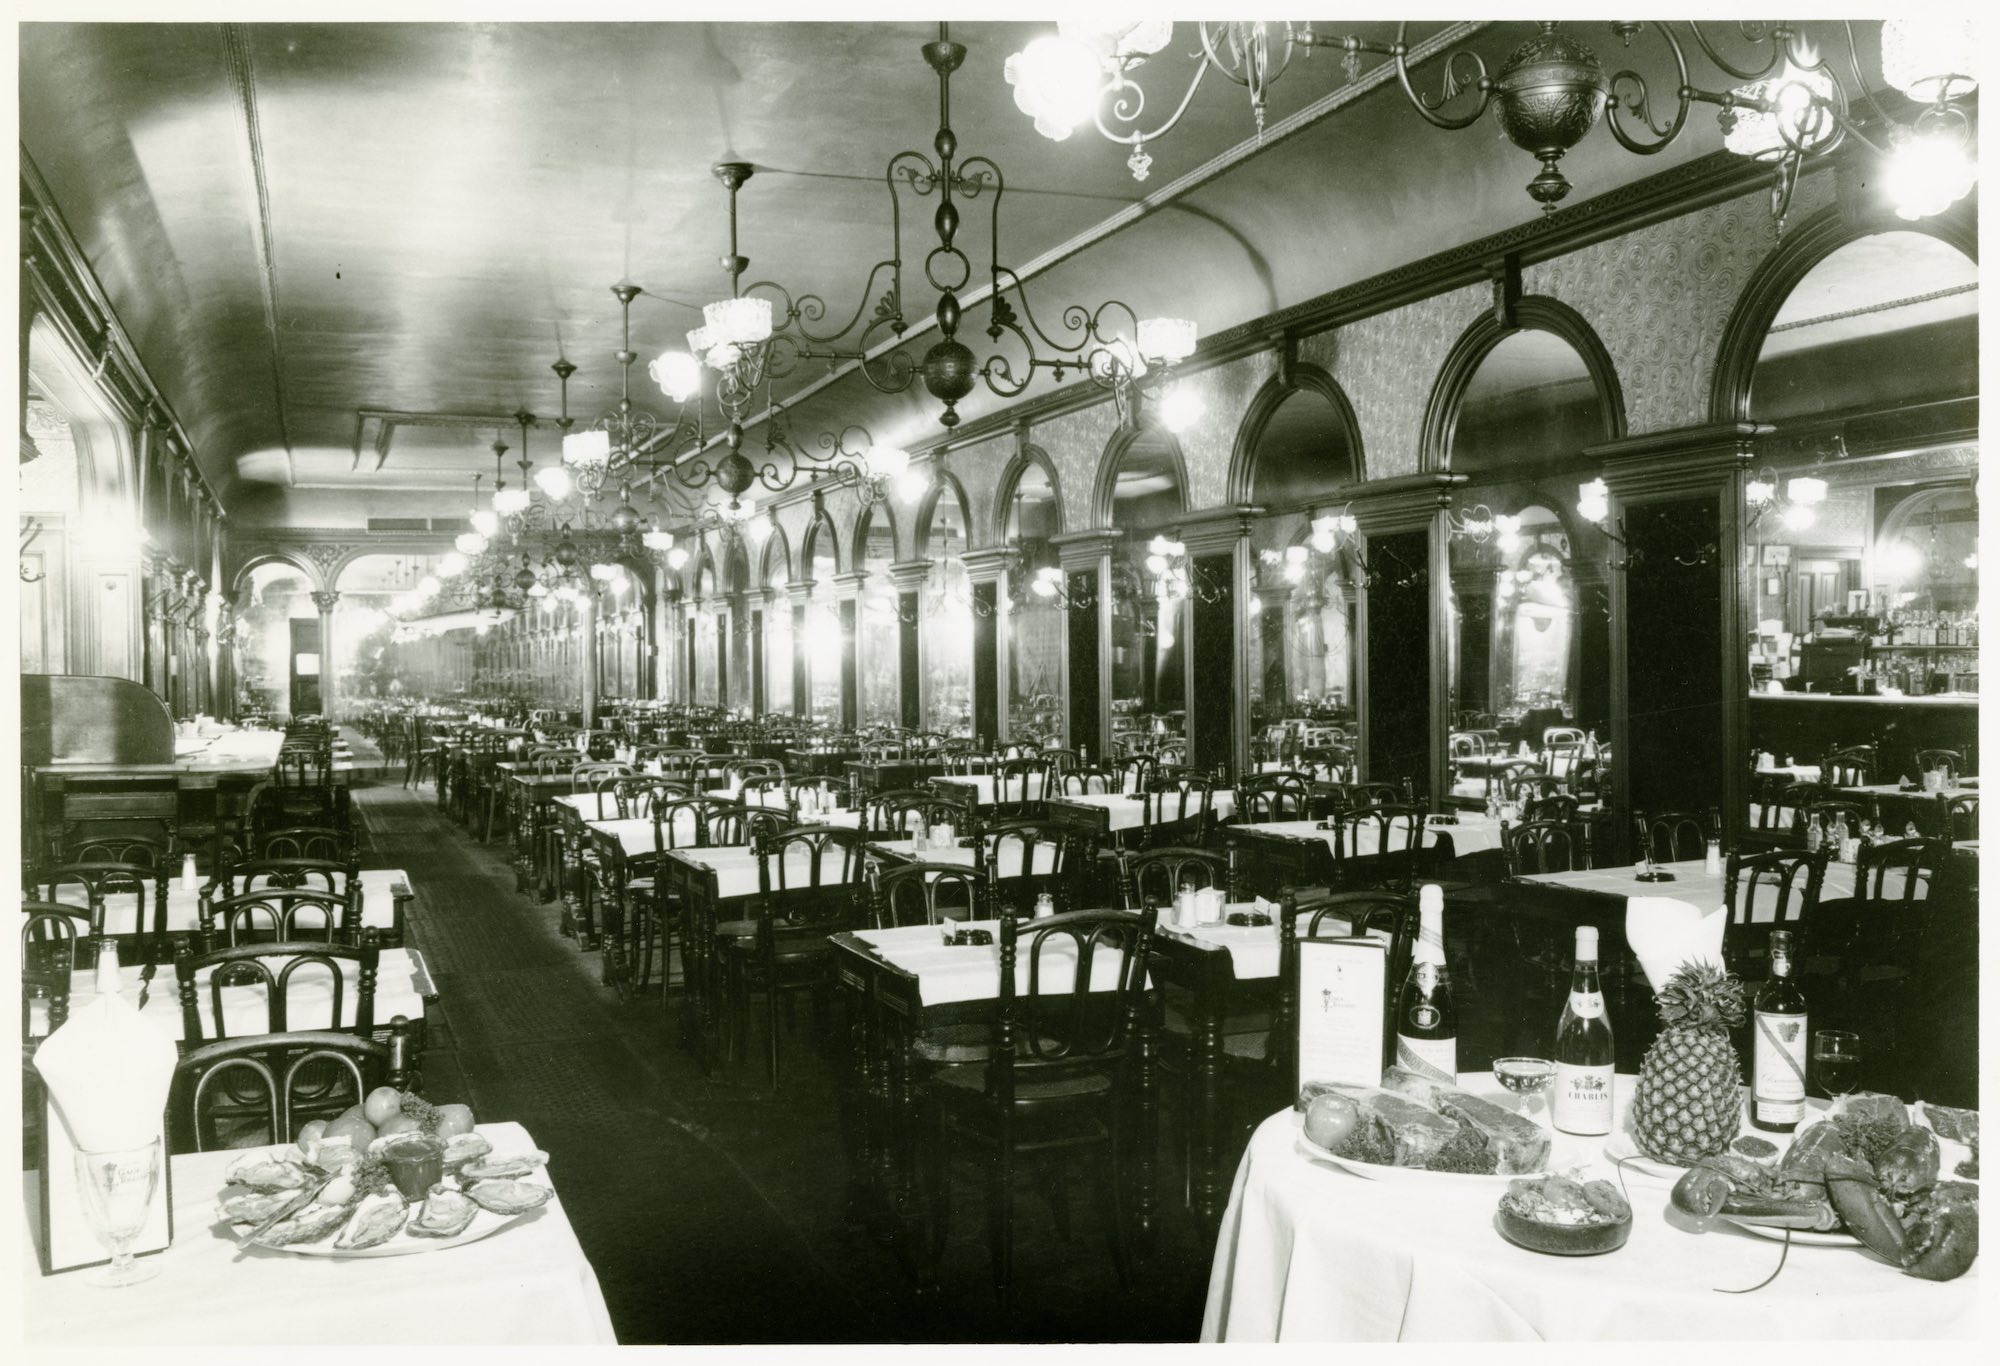 The Gage & Tollner dining room in the 1950s. // Photograph courtesy of the Brooklyn Historical Society